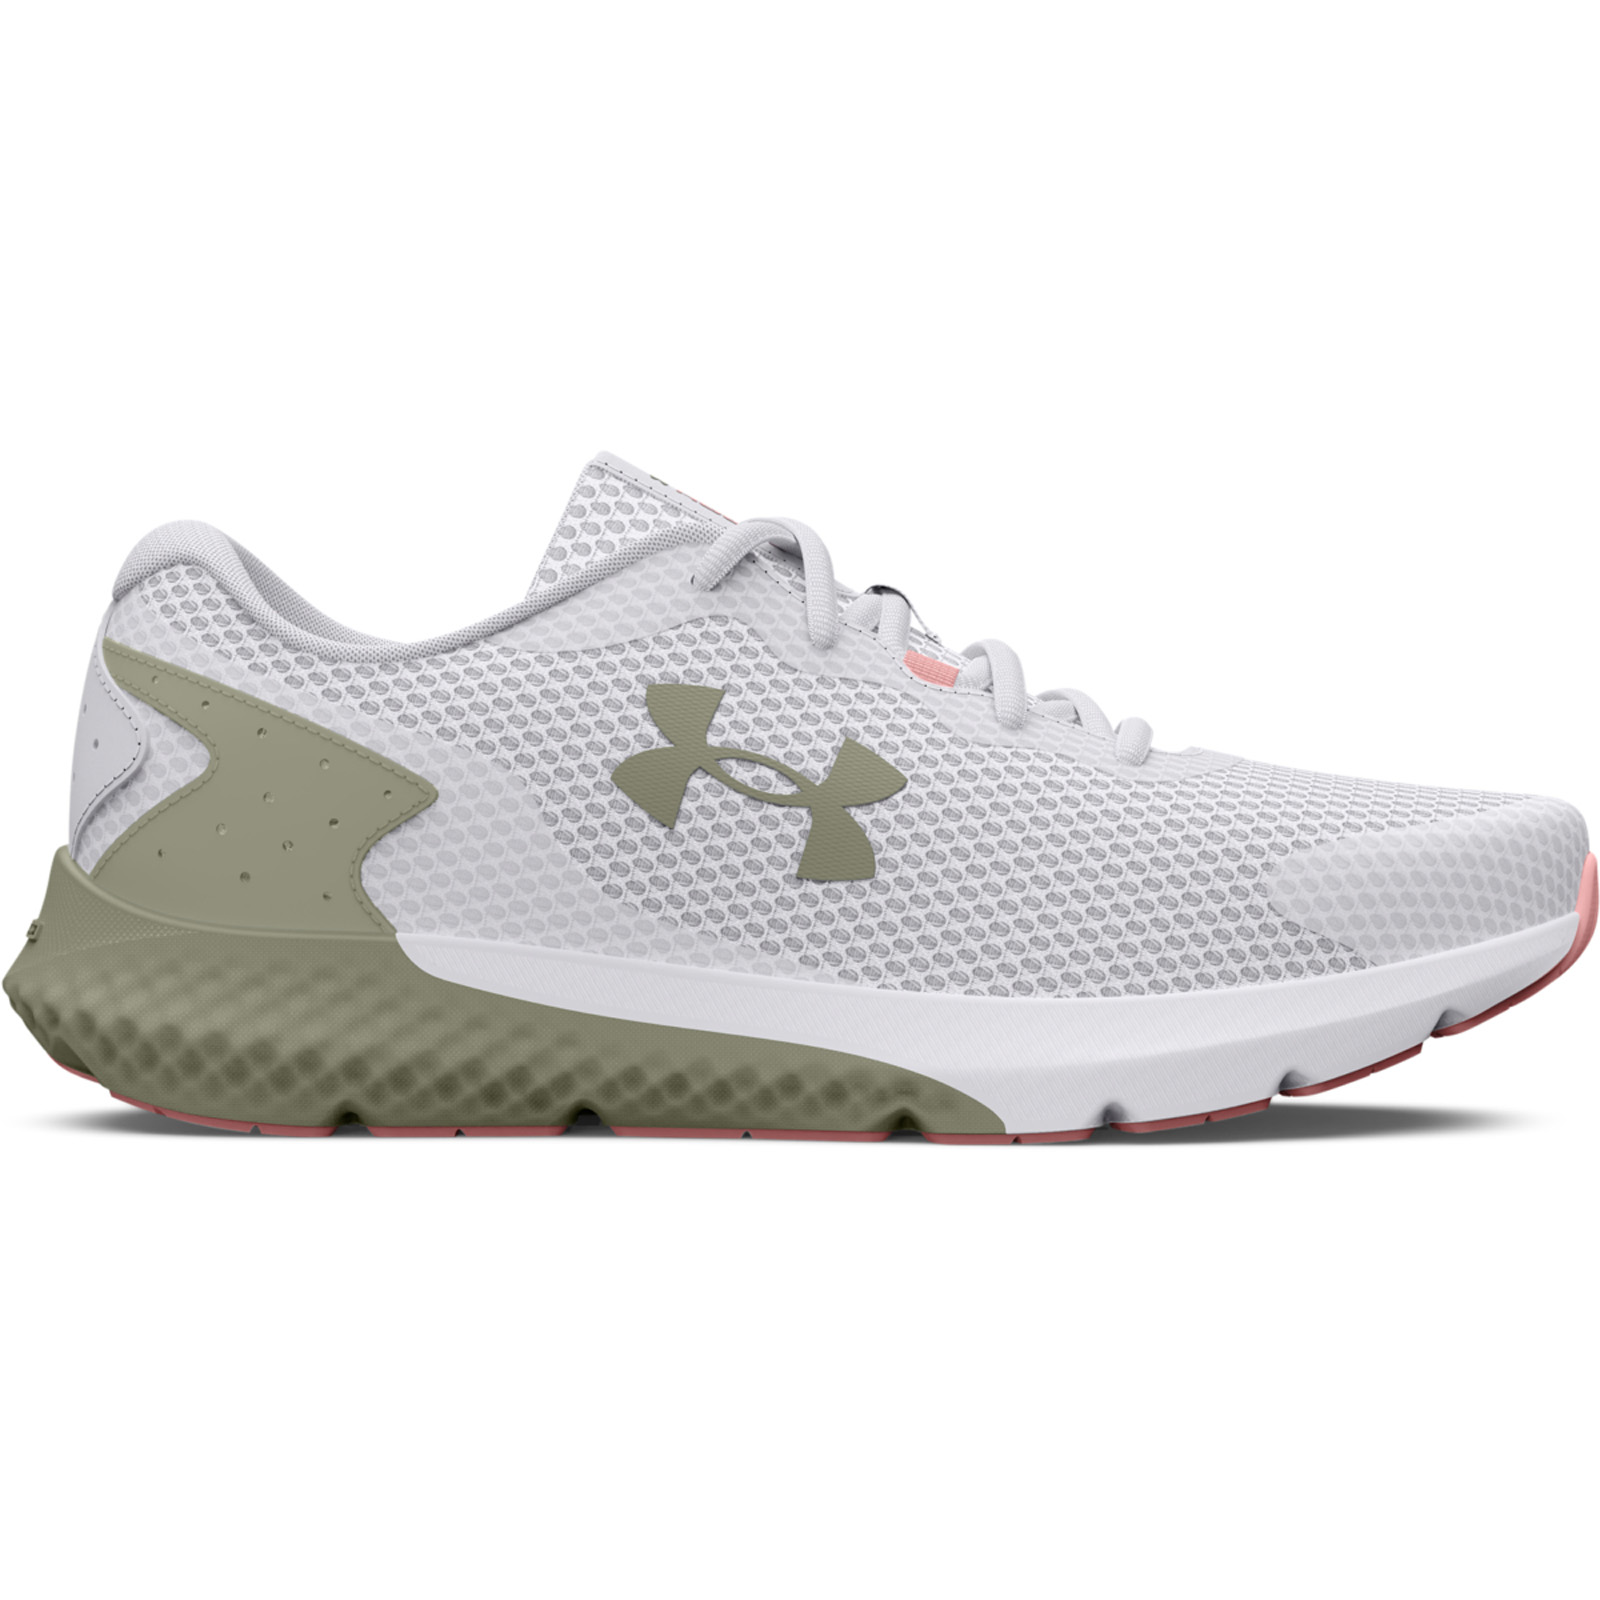 Under Armour - Women's UA Charged Rogue 3 Running Shoes - White/Grove Green/Grove Green Γυναικεία > Παπούτσια > Αθλητικά > Παπούτσι Low Cut